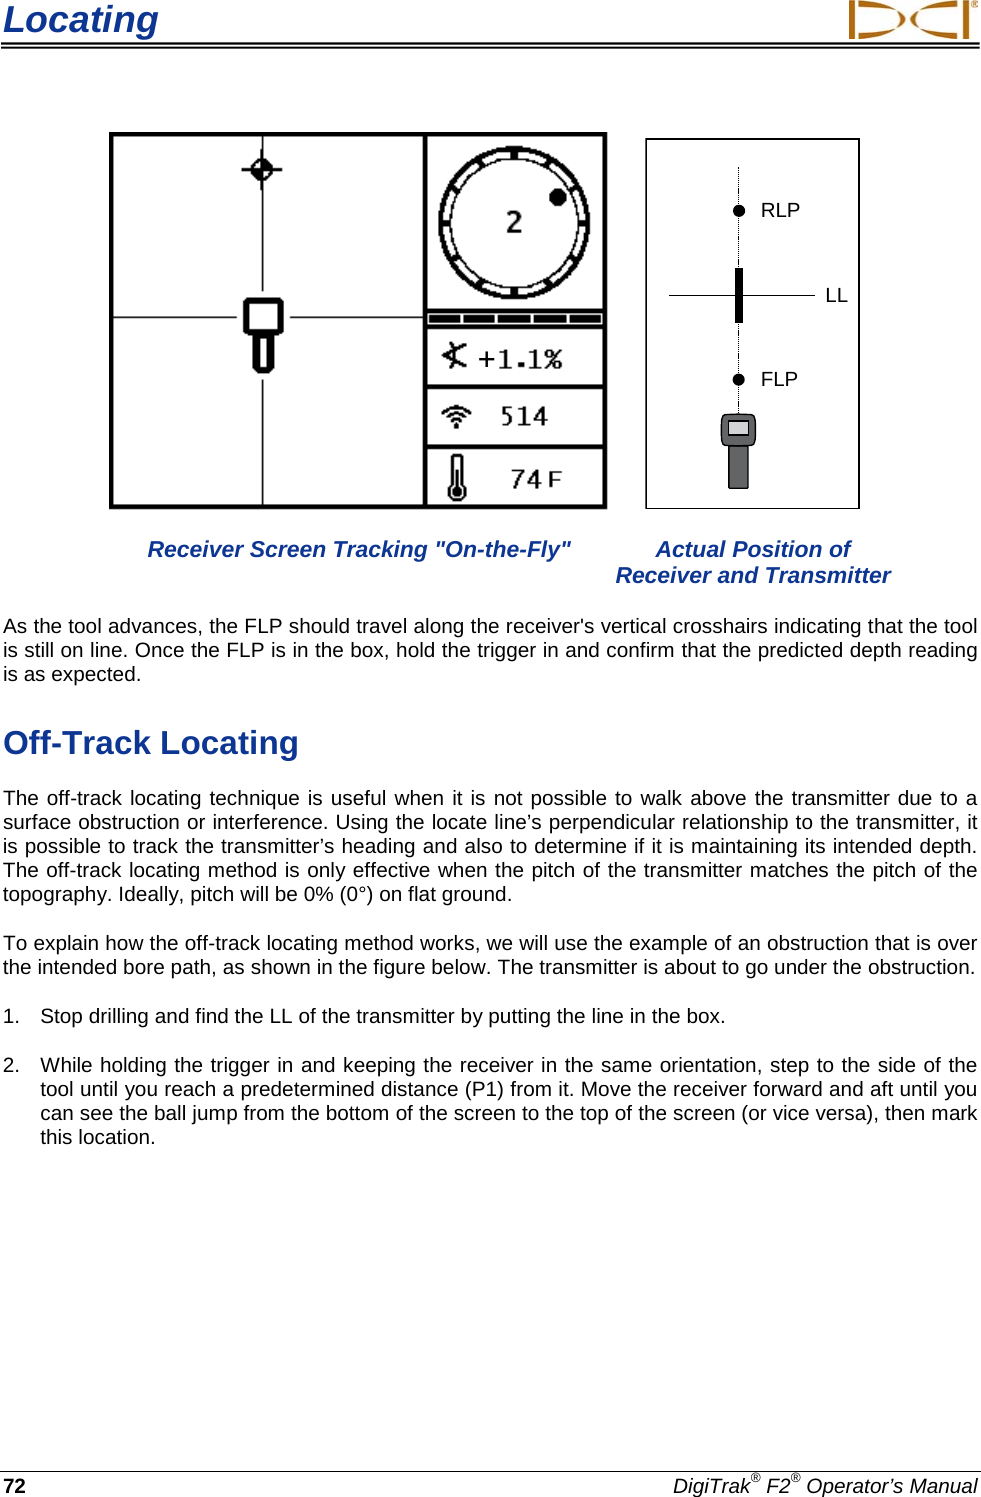 Locating     72 DigiTrak® F2® Operator’s Manual    RLPFLPLL  Receiver Screen Tracking &quot;On-the-Fly&quot; Actual Position of        Receiver and Transmitter As the tool advances, the FLP should travel along the receiver&apos;s vertical crosshairs indicating that the tool is still on line. Once the FLP is in the box, hold the trigger in and confirm that the predicted depth reading is as expected. Off-Track Locating The off-track locating technique is useful when it is not possible to walk above the transmitter due to a surface obstruction or interference. Using the locate line’s perpendicular relationship to the transmitter, it is possible to track the transmitter’s heading and also to determine if it is maintaining its intended depth. The off-track locating method is only effective when the pitch of the transmitter matches the pitch of the topography. Ideally, pitch will be 0% (0°) on flat ground. To explain how the off-track locating method works, we will use the example of an obstruction that is over the intended bore path, as shown in the figure below. The transmitter is about to go under the obstruction. 1. Stop drilling and find the LL of the transmitter by putting the line in the box. 2. While holding the trigger in and keeping the receiver in the same orientation, step to the side of the tool until you reach a predetermined distance (P1) from it. Move the receiver forward and aft until you can see the ball jump from the bottom of the screen to the top of the screen (or vice versa), then mark this location. + 